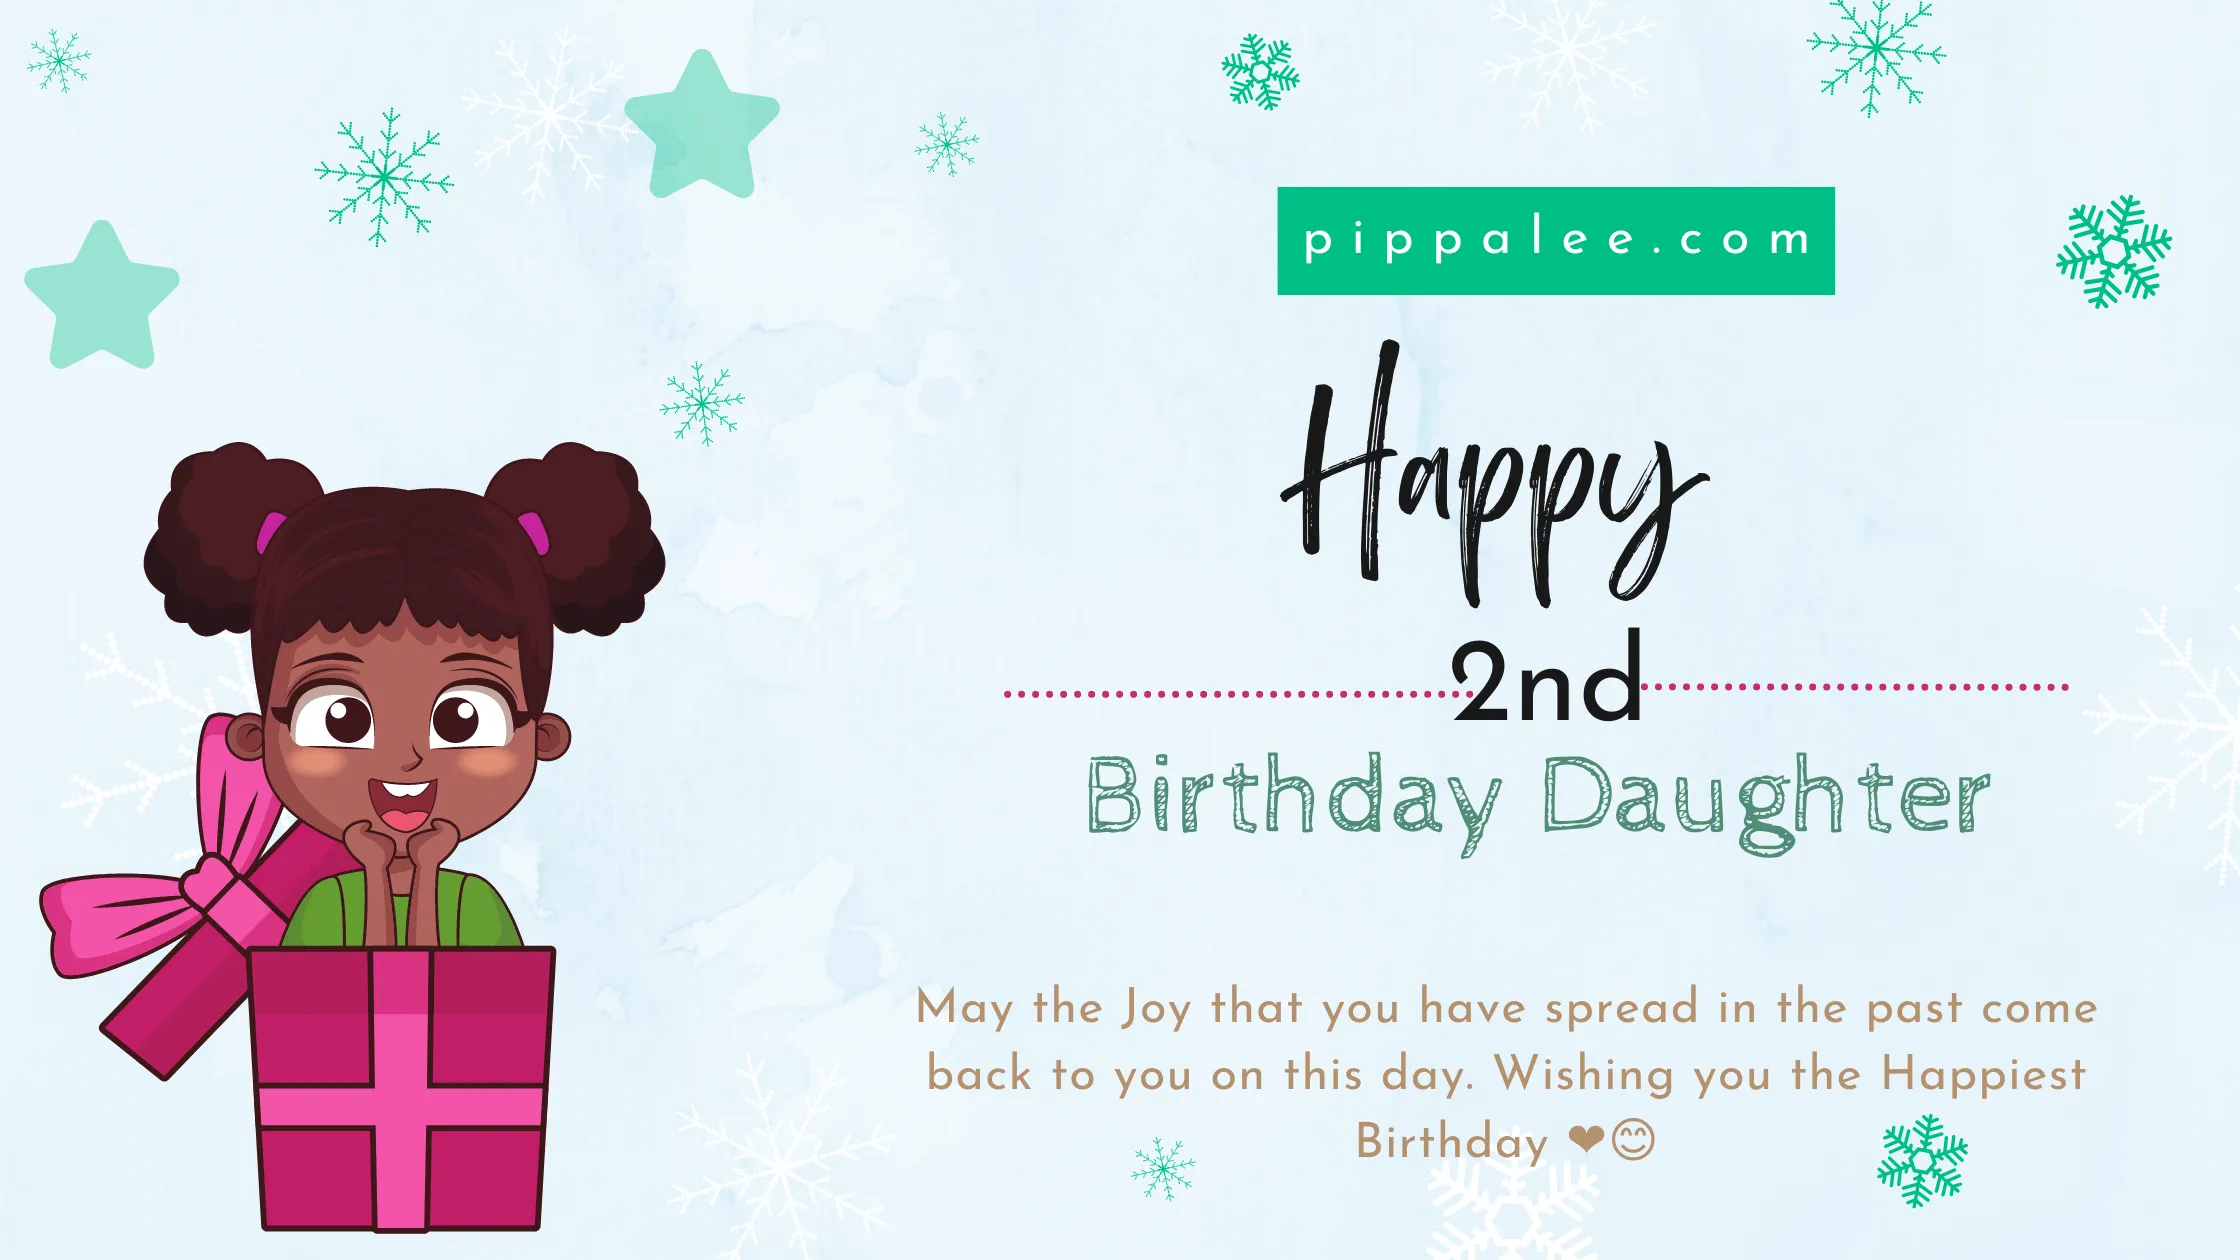 Happy 2nd Birthday Daughter - Wishes & Messages